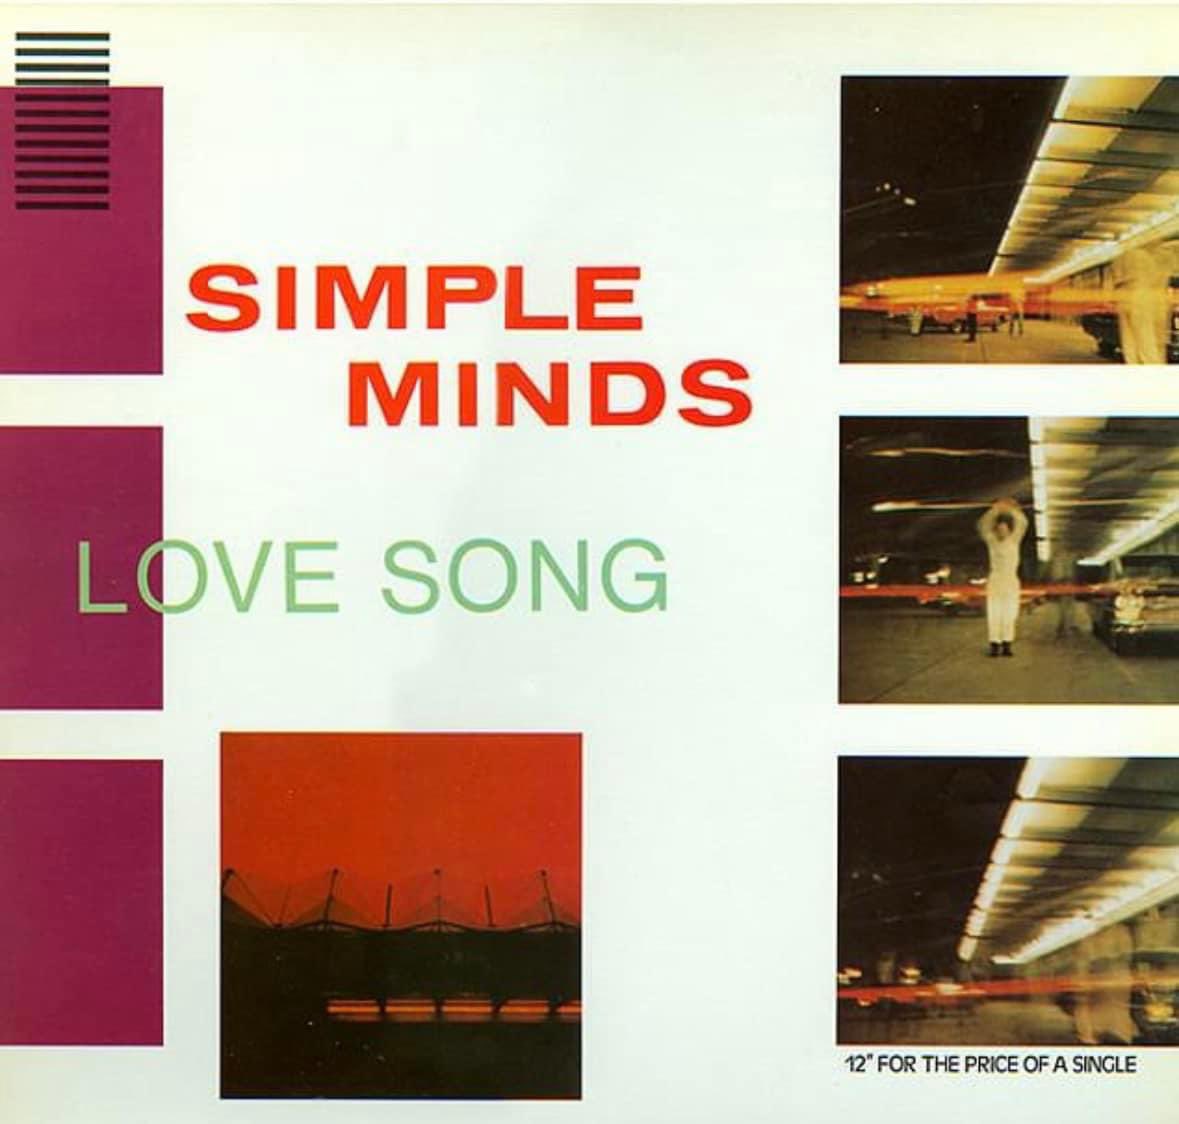 Happy anniversary to Simple Minds single, “Love Song”. Released this week in 1981. #simpleminds #lovesong #sonsandfascination